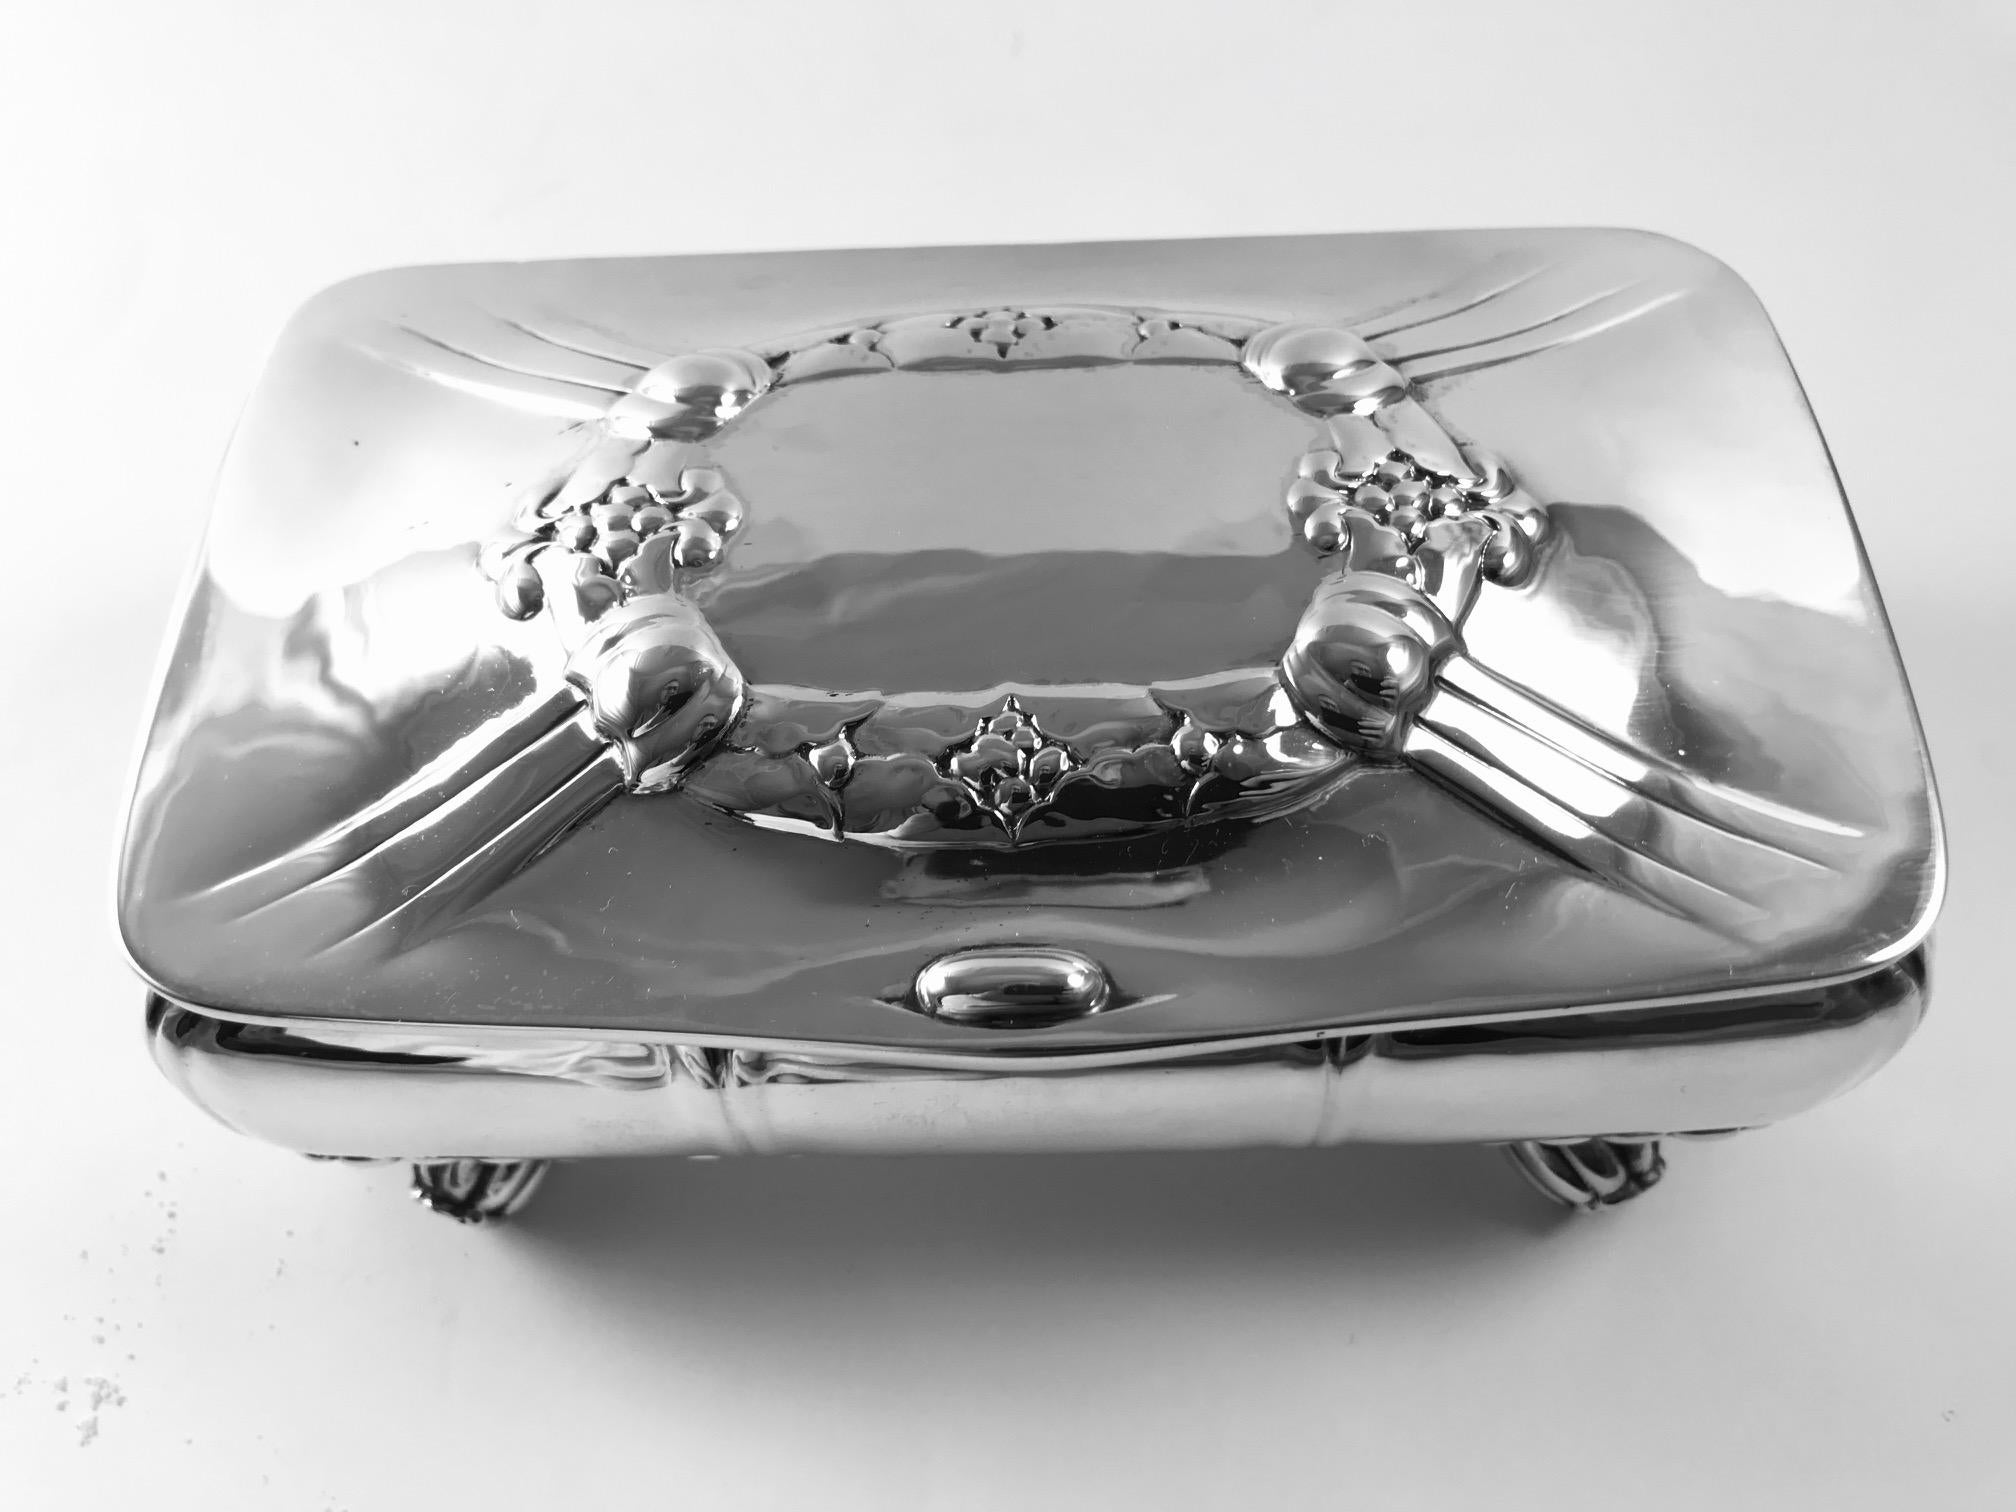 This is a good sized Georg Jensen 830 silver box, ornately decorated with eight large floral buds as feet, design #133 by Georg Jensen.

The box has a wooden lining and measures 6? x 3 1/2? x 2 3/4? (15cm x 9cm x 7cm). Gross weight including the